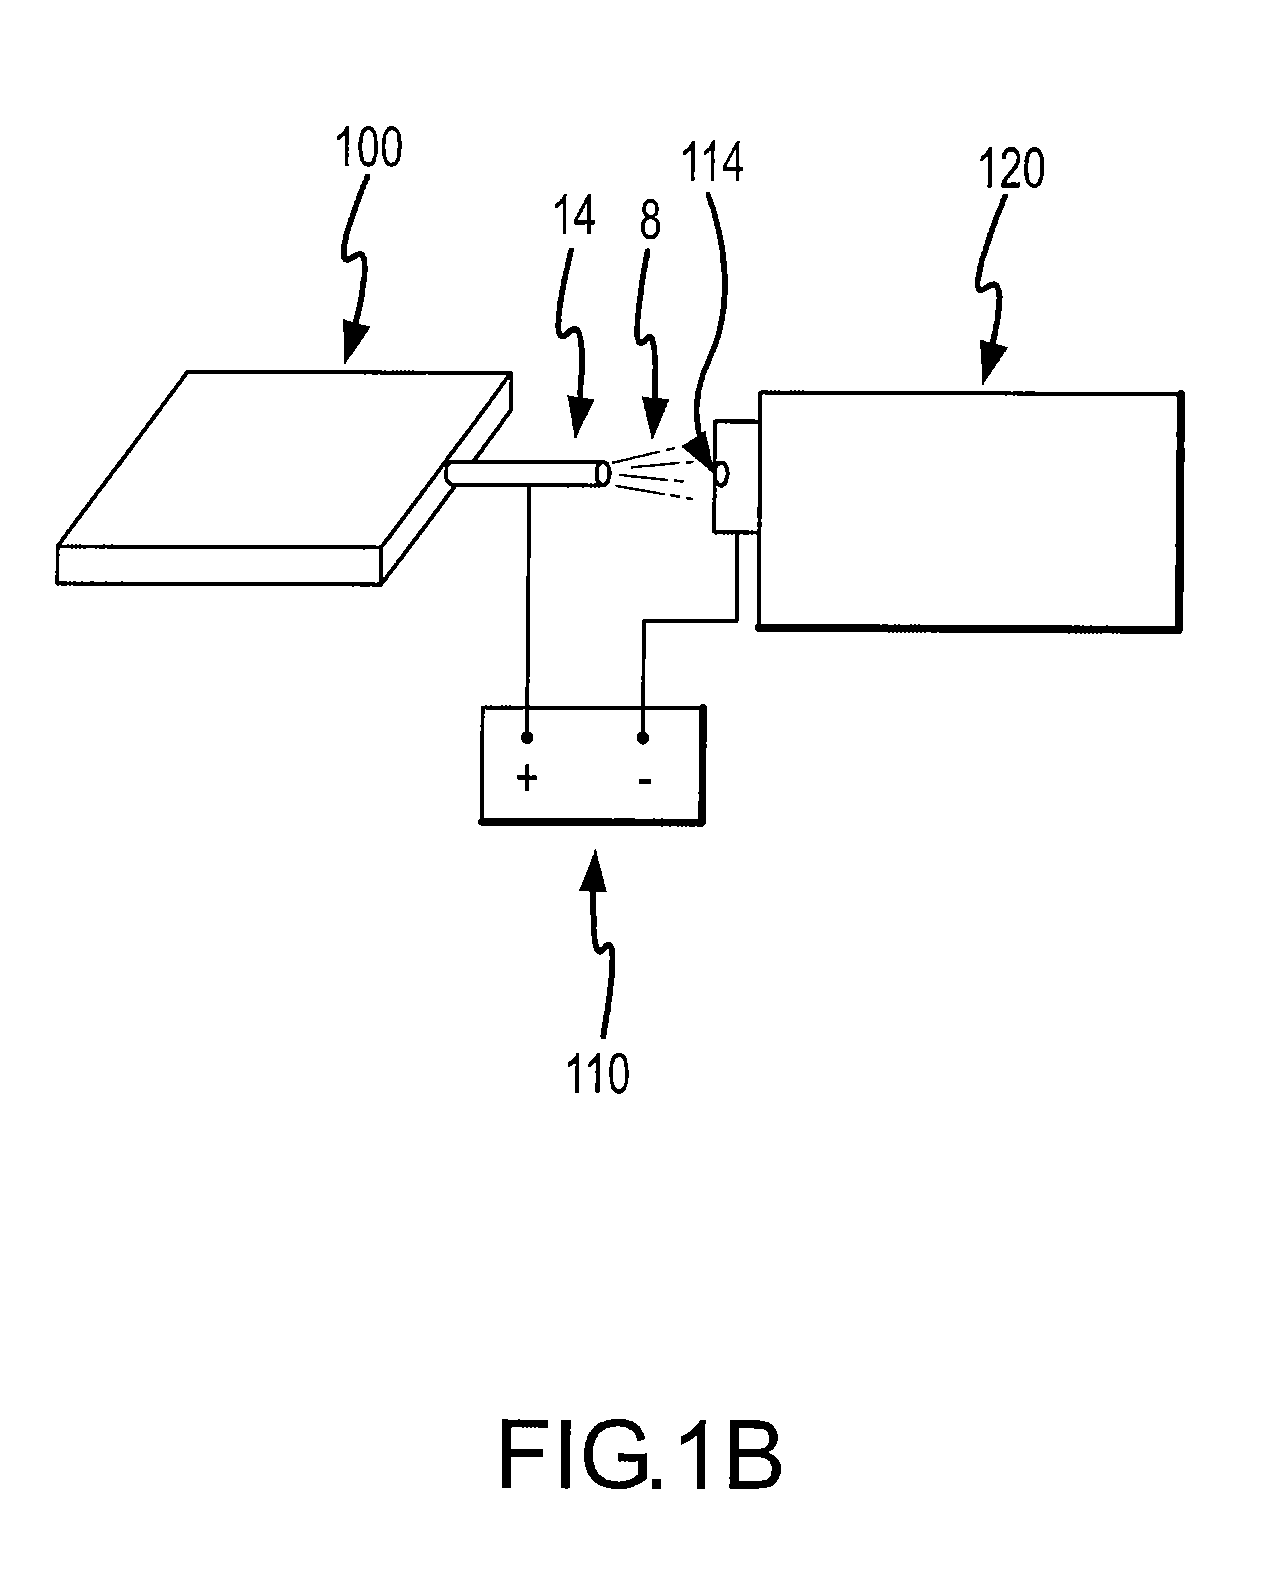 Microfluidic-based electrospray source for analytical devices with a rotary fluid flow channel for sample preparation